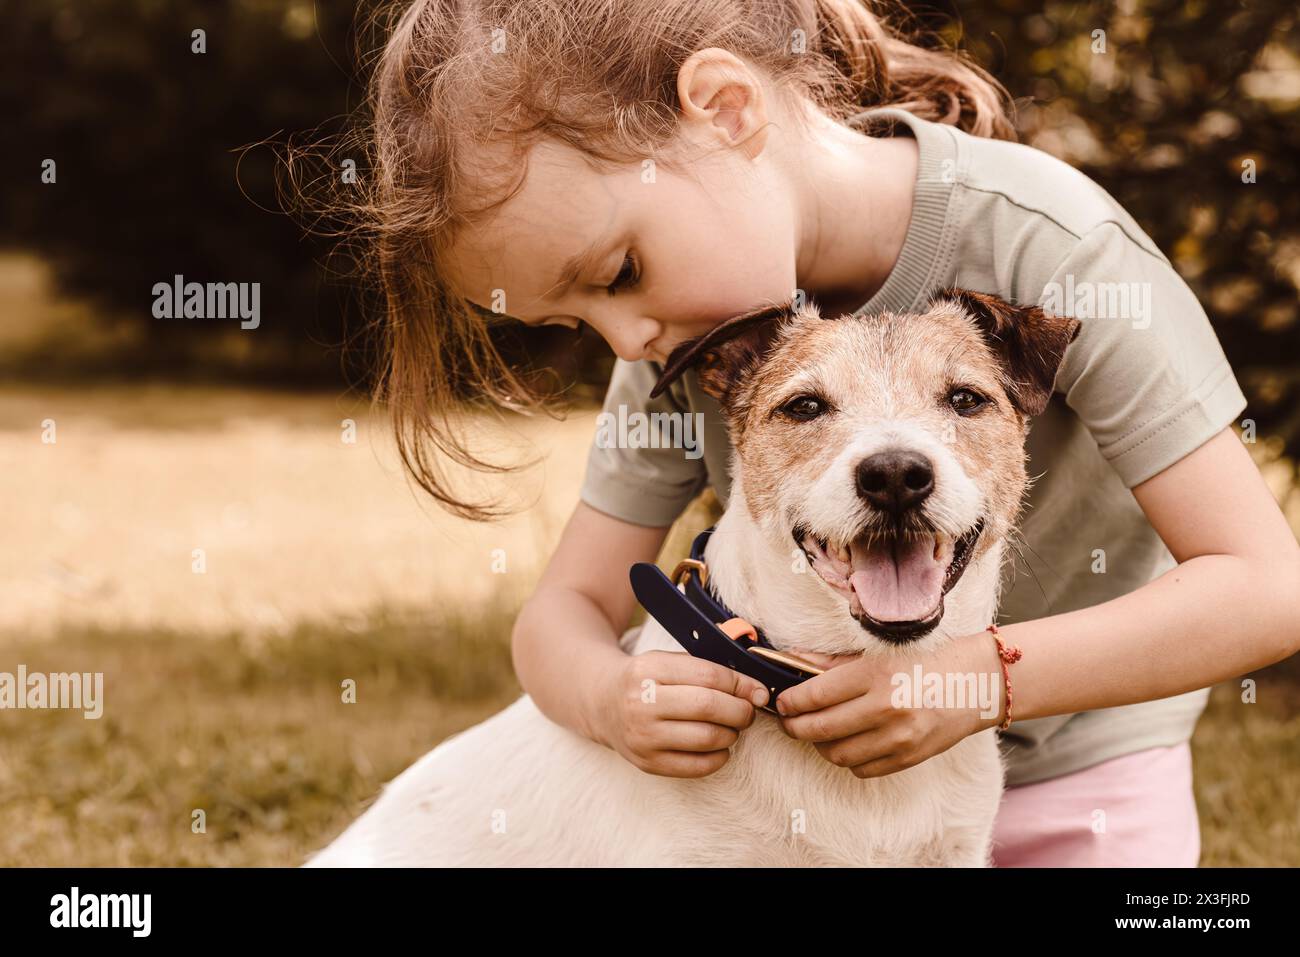 Little girl puts on dog collar on her pet dog to go for a walk Stock Photo